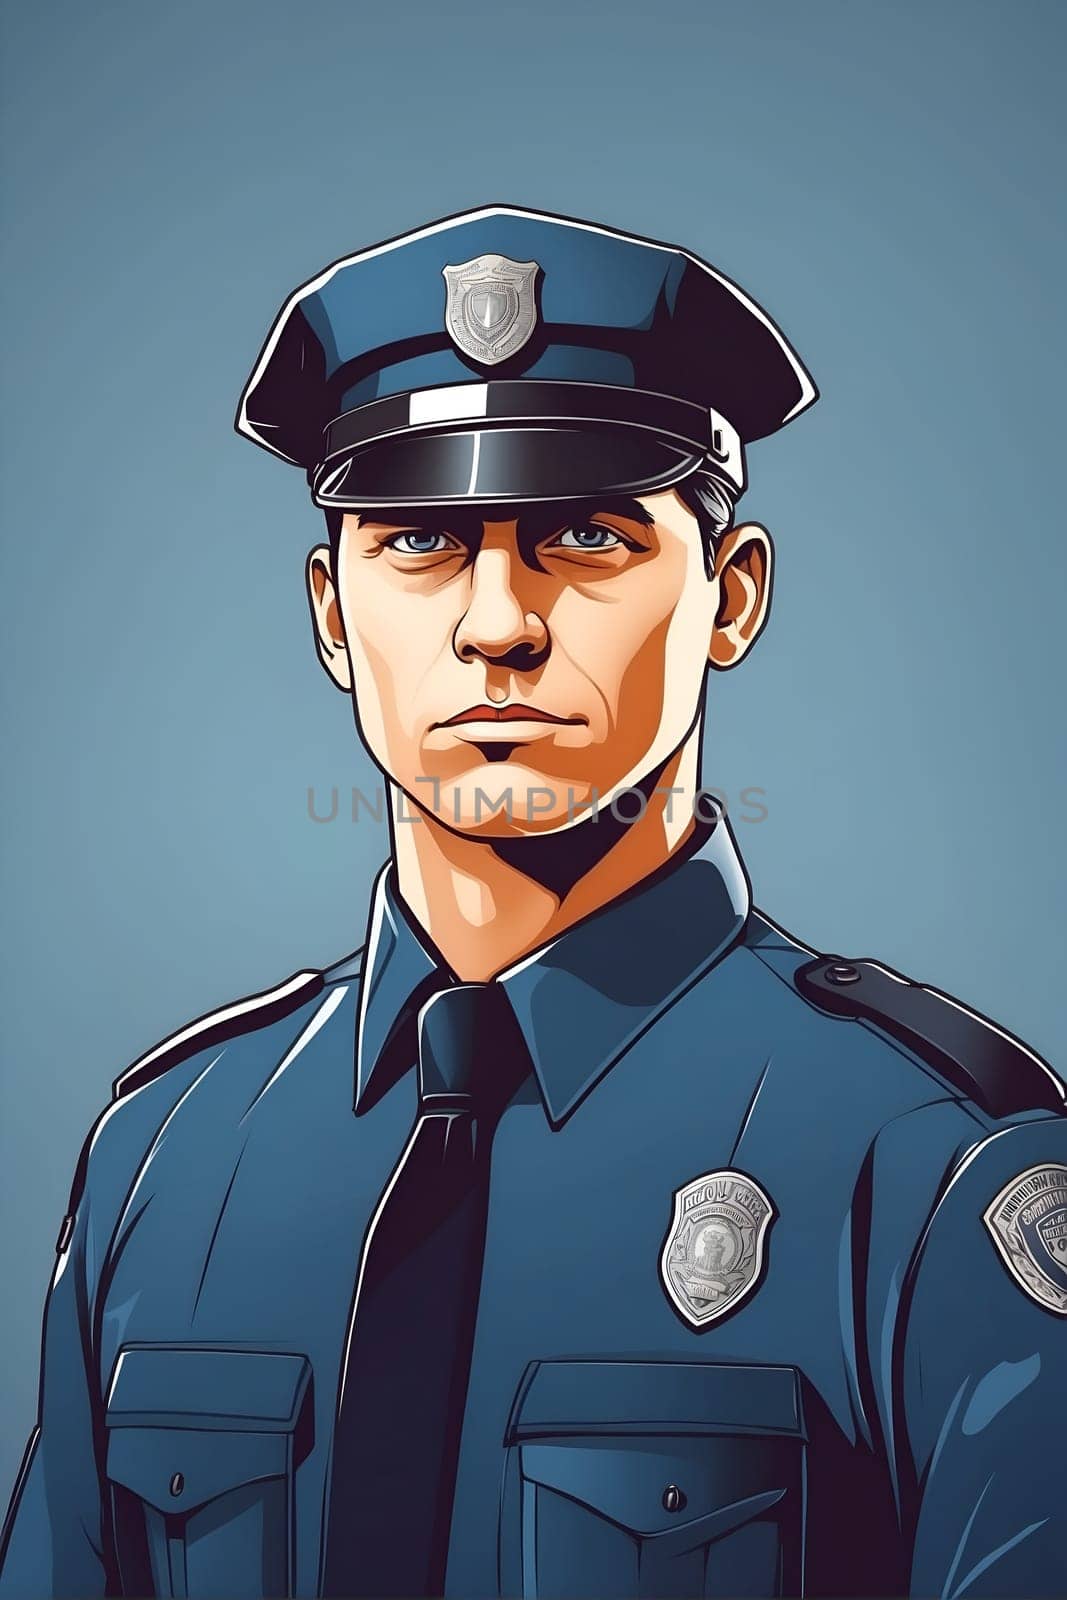 A detailed drawing of a man wearing a police uniform, depicting a law enforcement officer in action.